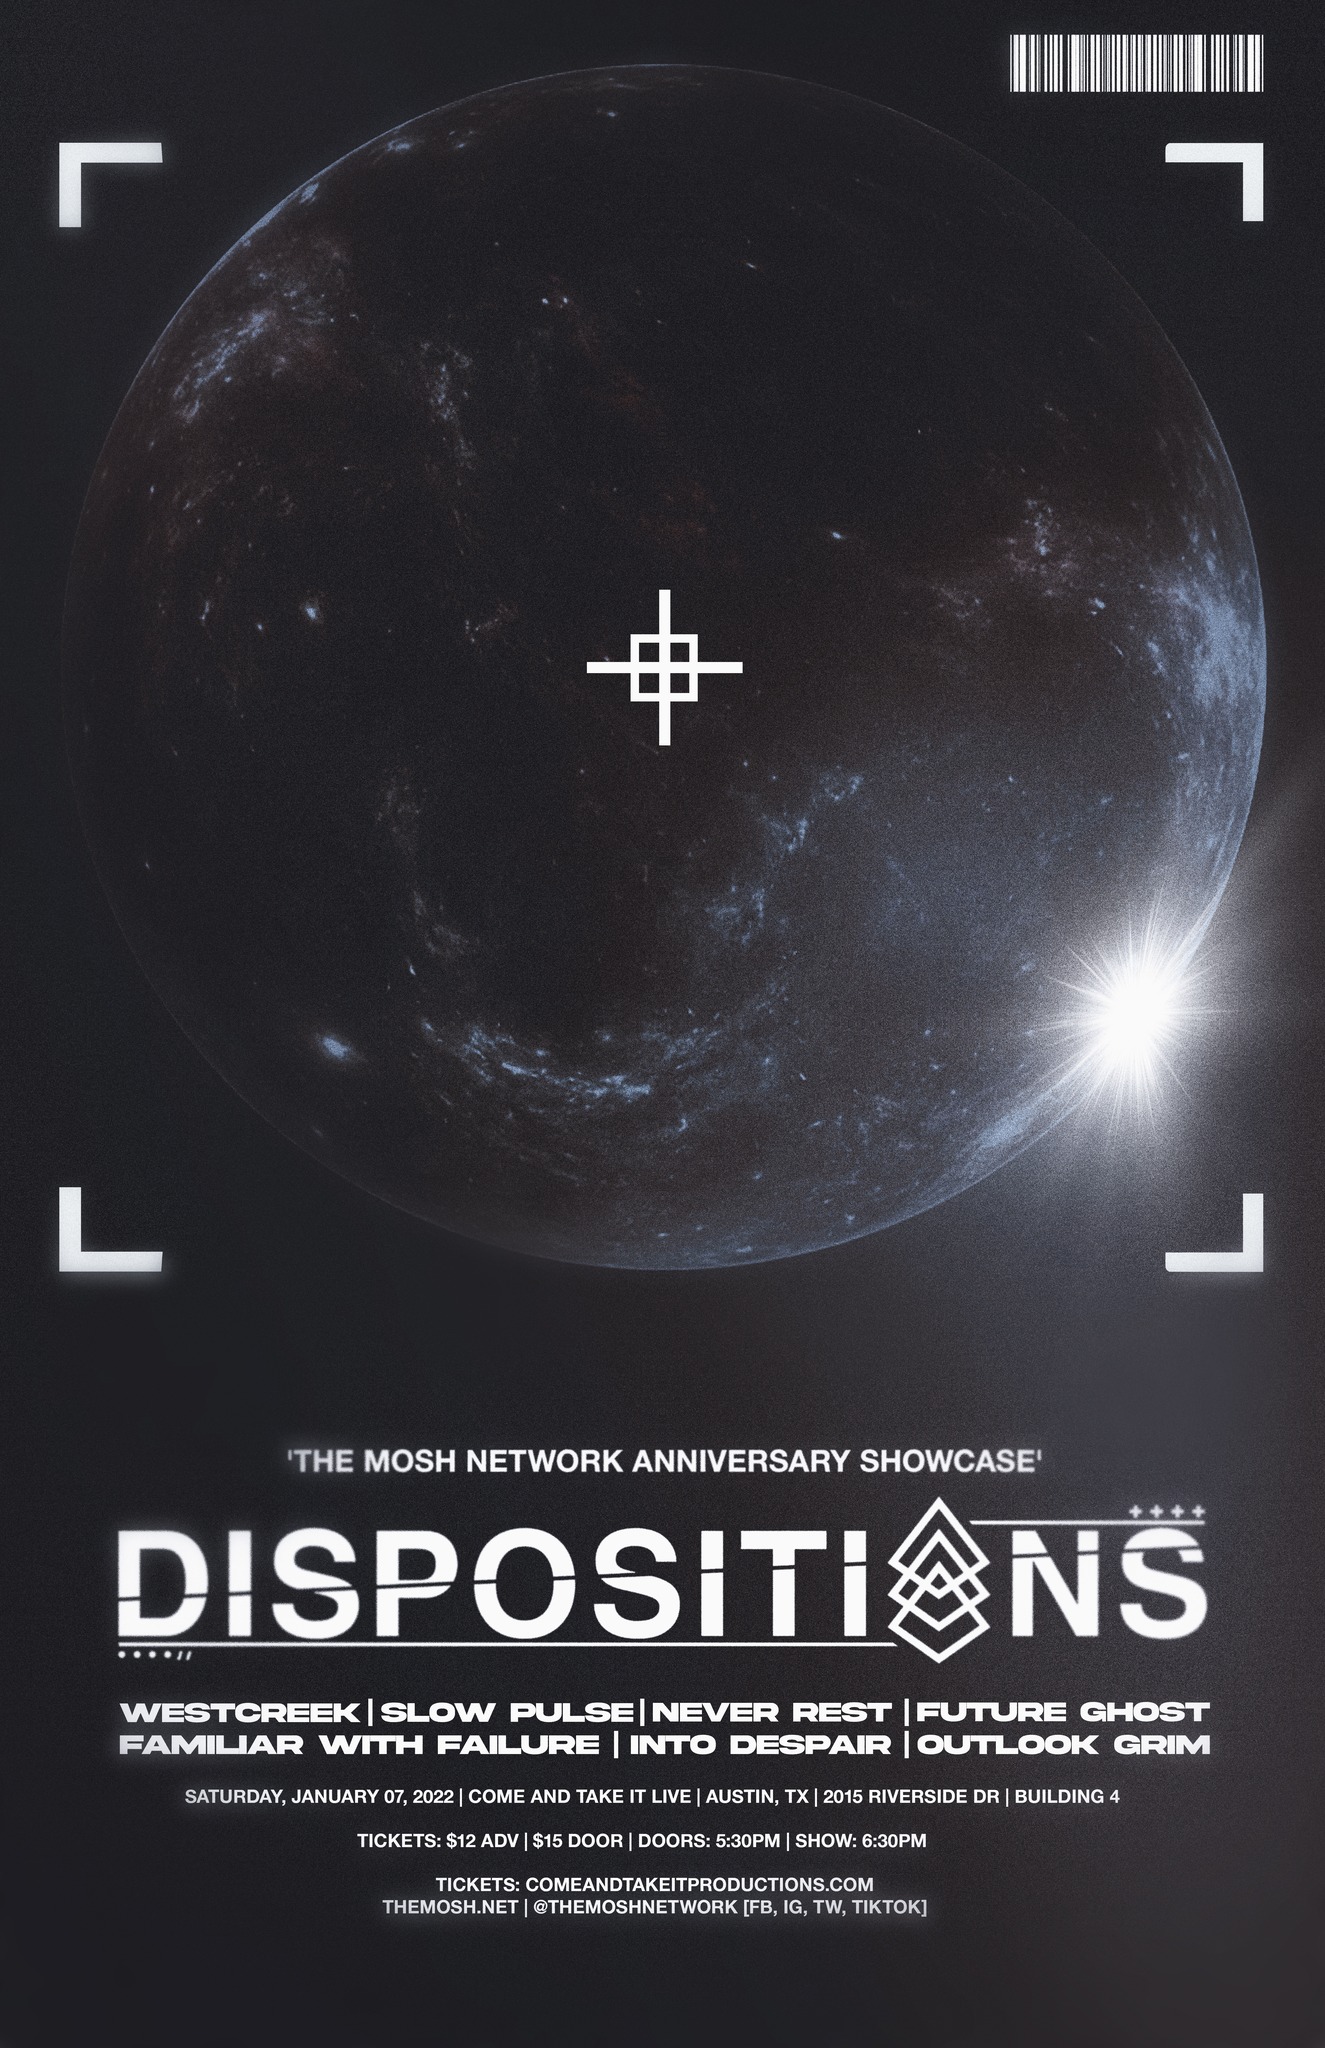 The Mosh Network Anniversary Showcase with Dispositions & More